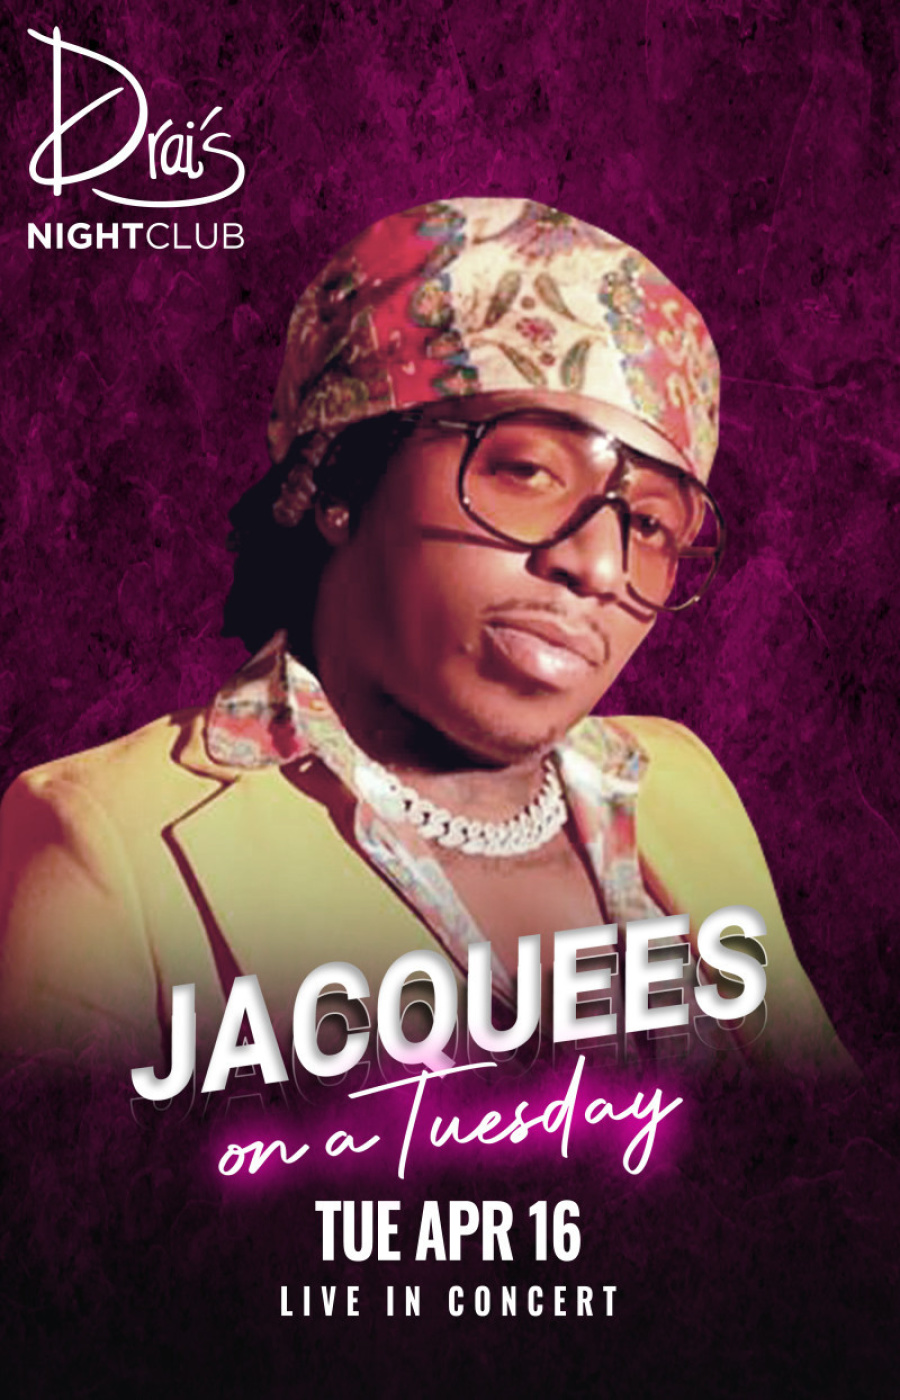 JACQUEES